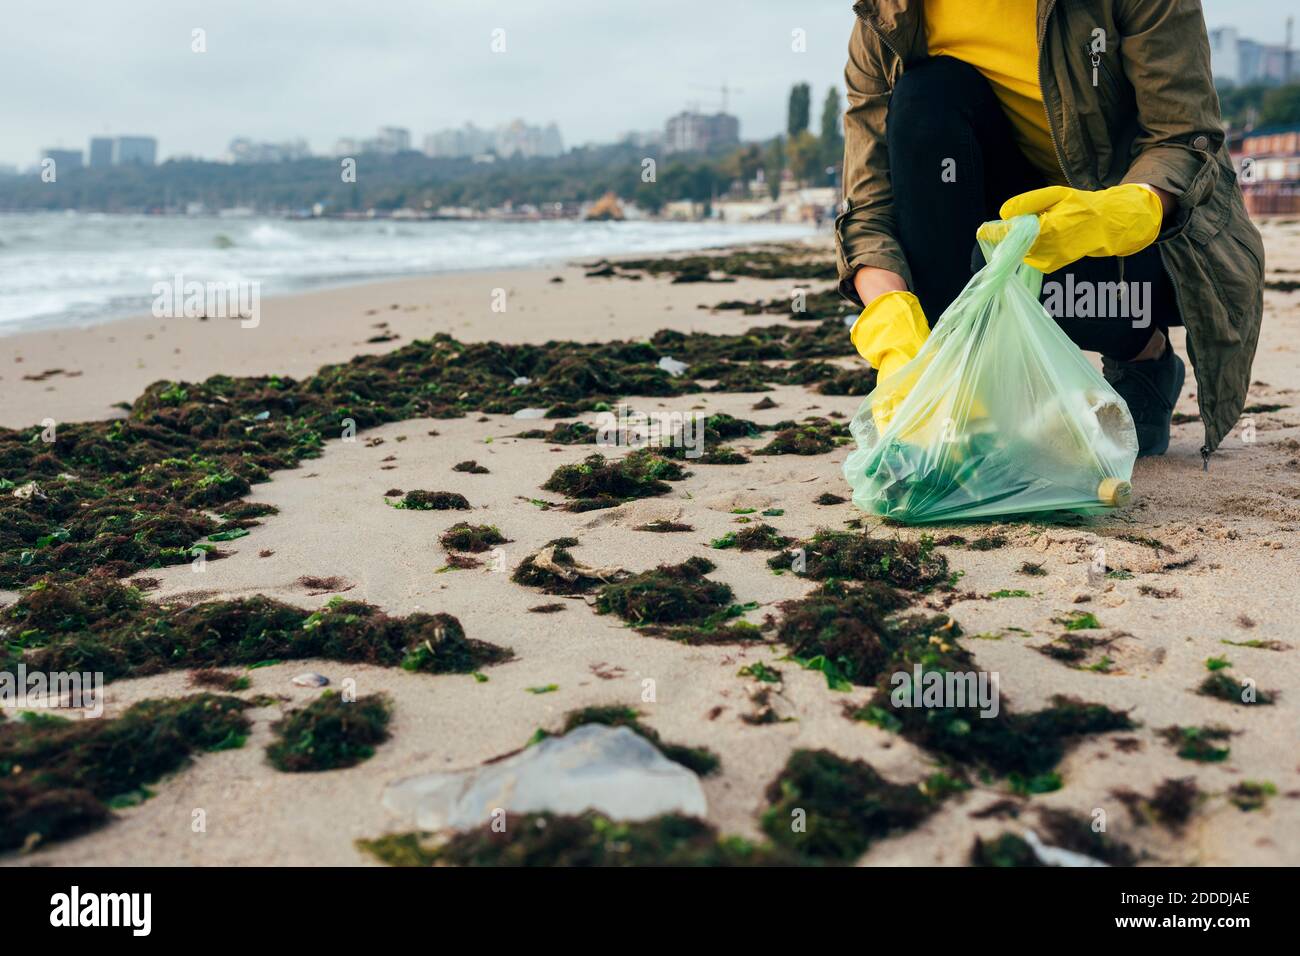 Environmentalist collecting garbage in garbage bag while crouching at beach Stock Photo